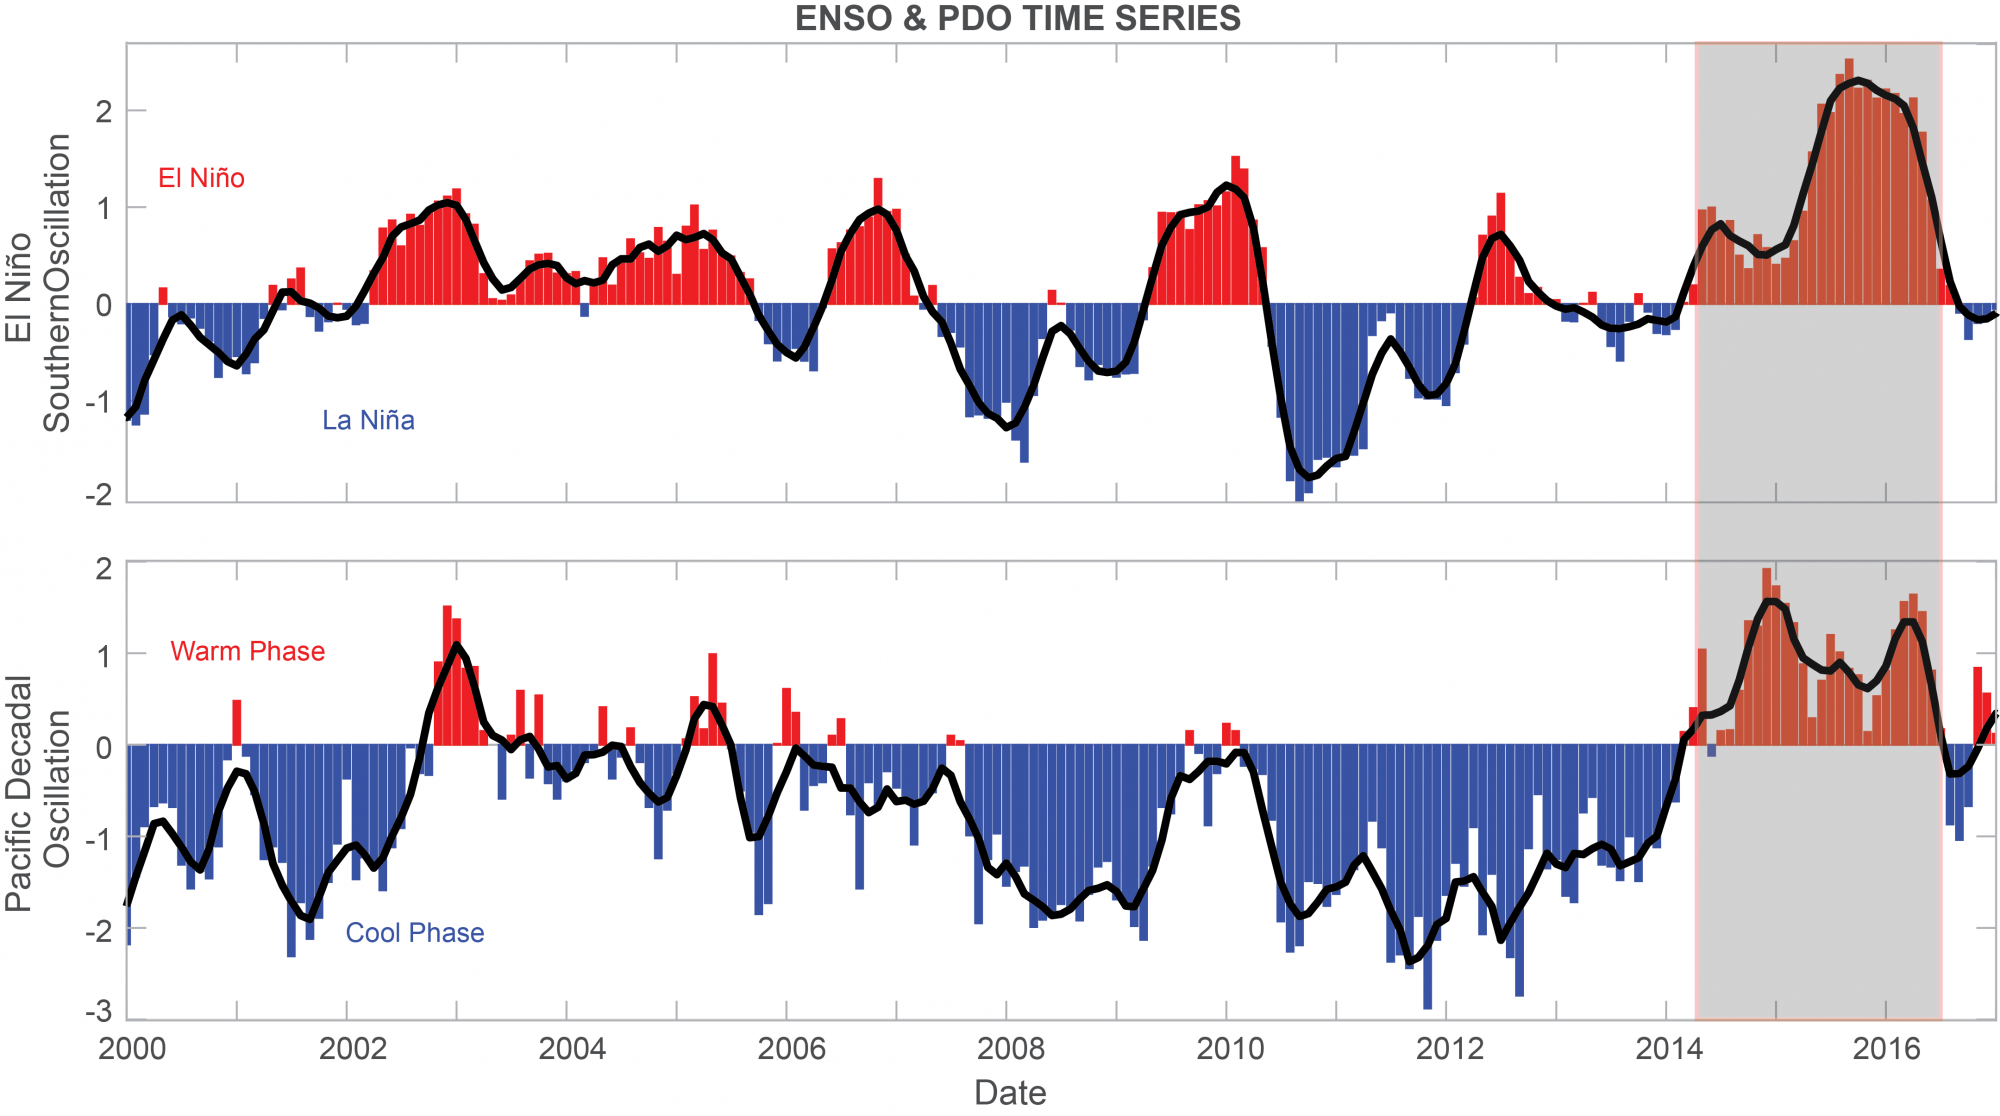  Indices representing the El Niño Southern Oscillation (ENSO), with El Niño and La Niña represented as red (positive) and blue (negative) values (top) and the Pacific Decadal Oscillation (PDO), with the warm phase and cool phase represented as red (positive) and blue (negative) values (bottom). 